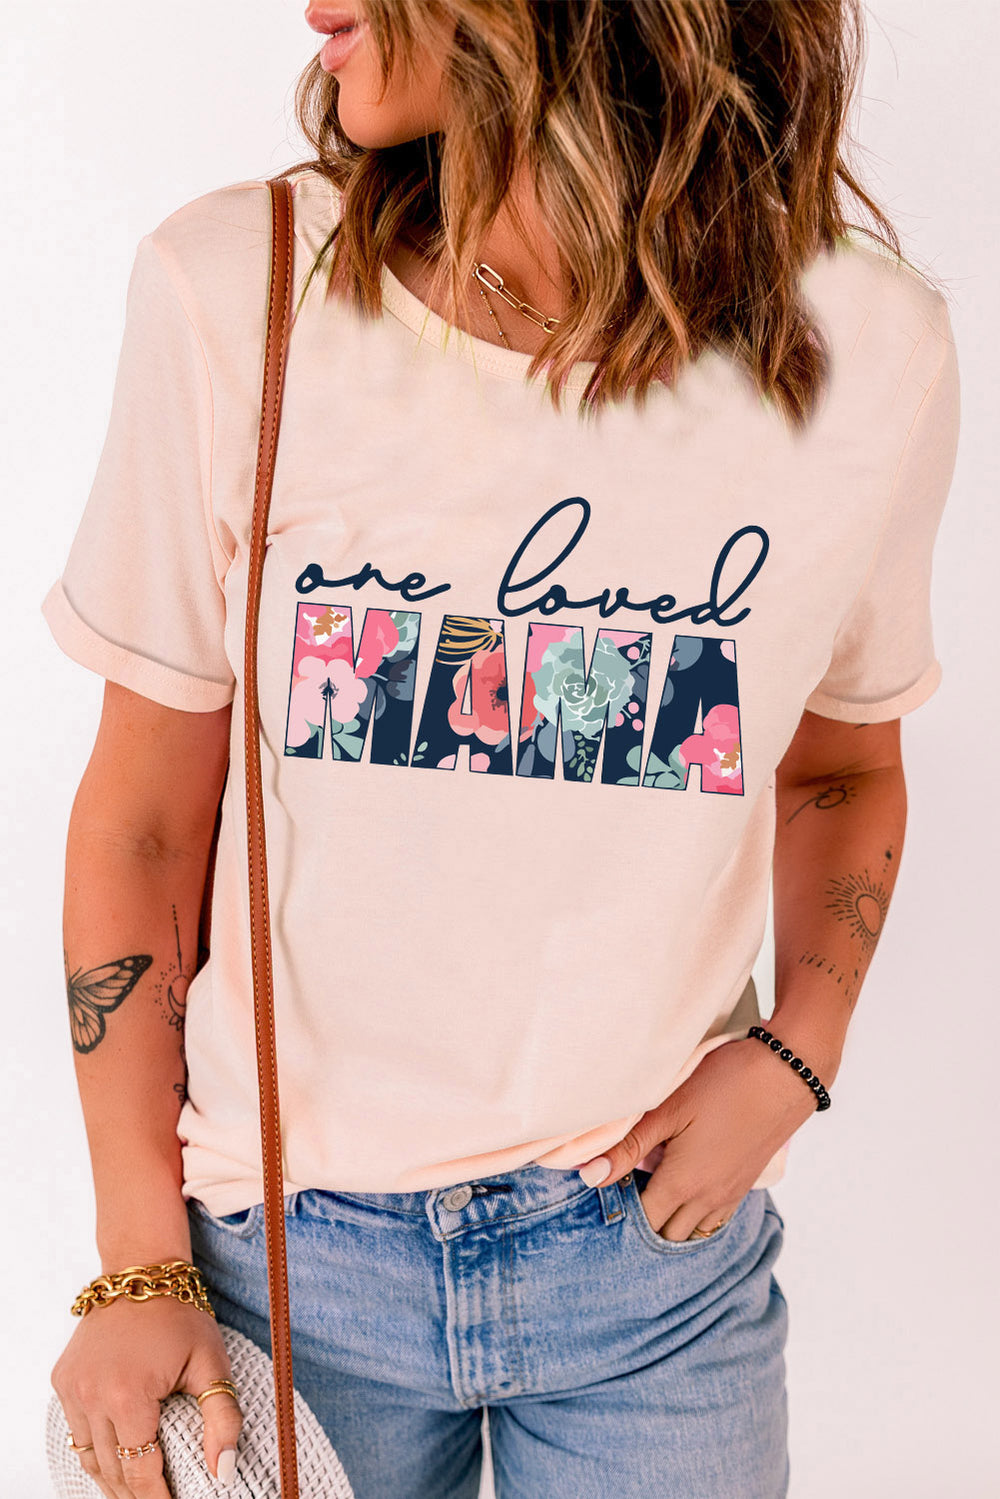 ONE LOVED MAMA Floral Graphic Tee - Cheeky Chic Boutique